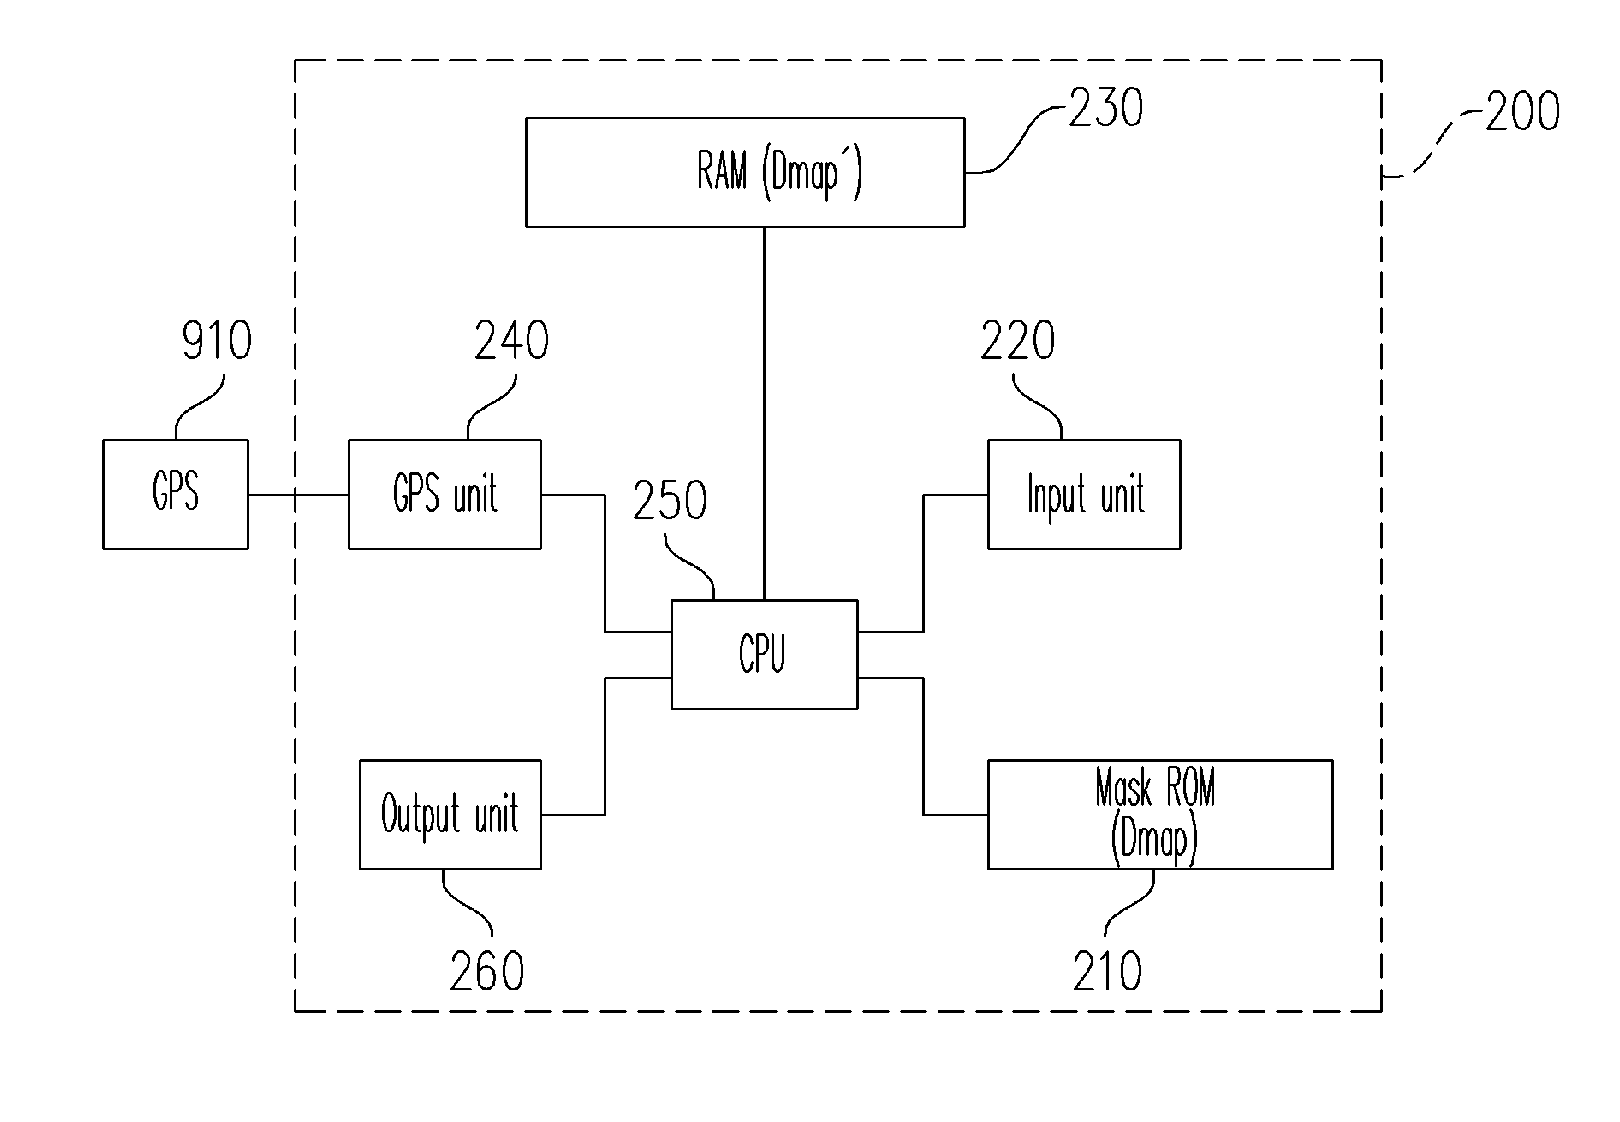 Portable device and method for providing navigation data